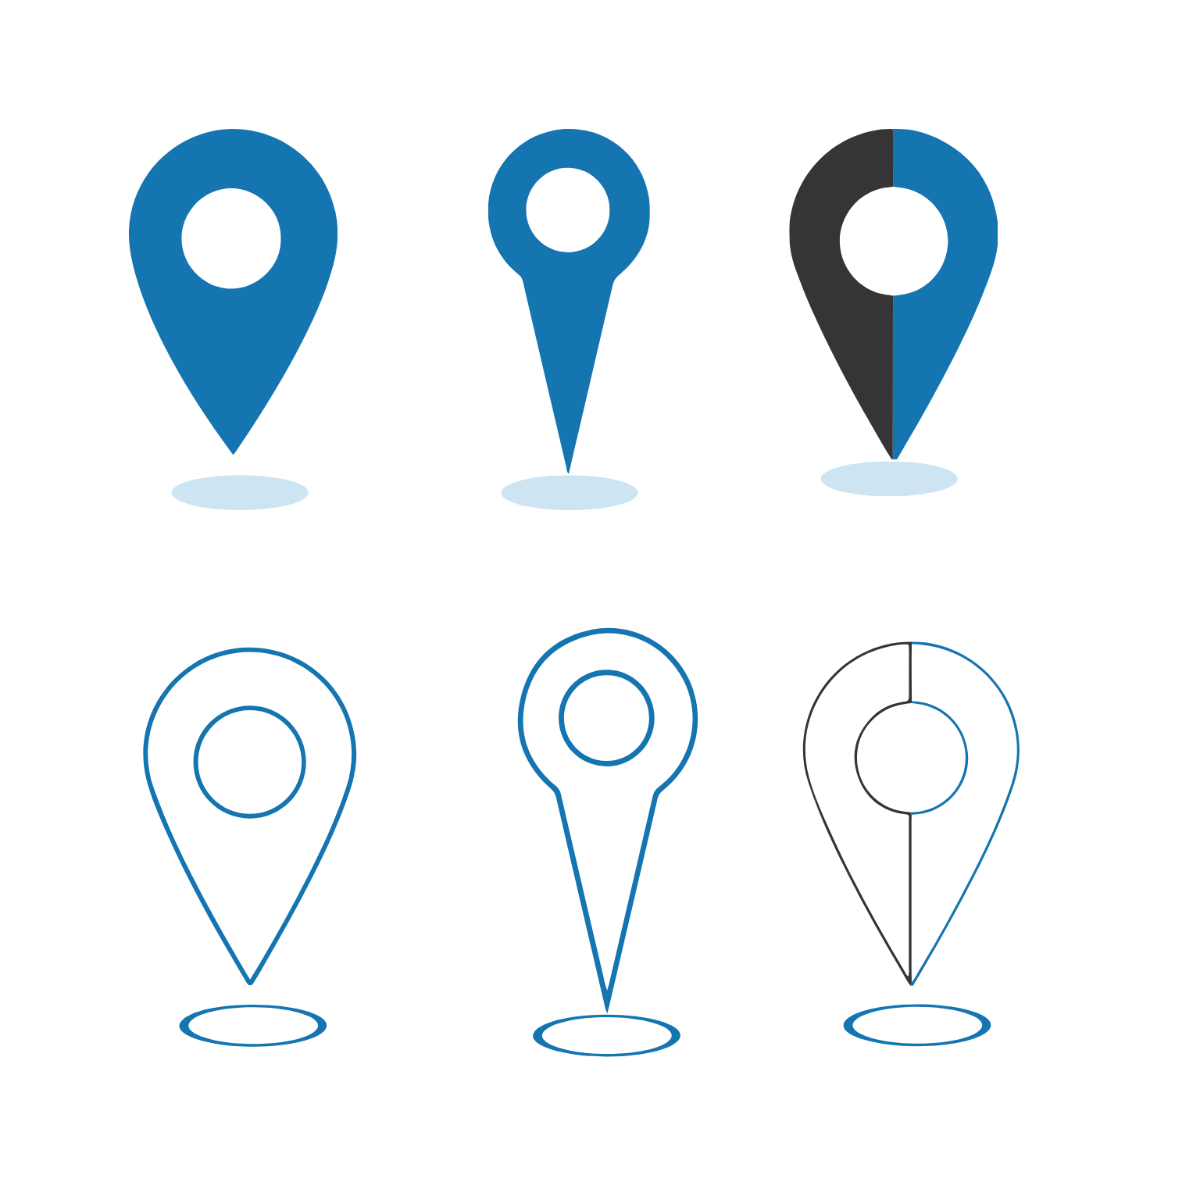 Location Pointer Vector Template